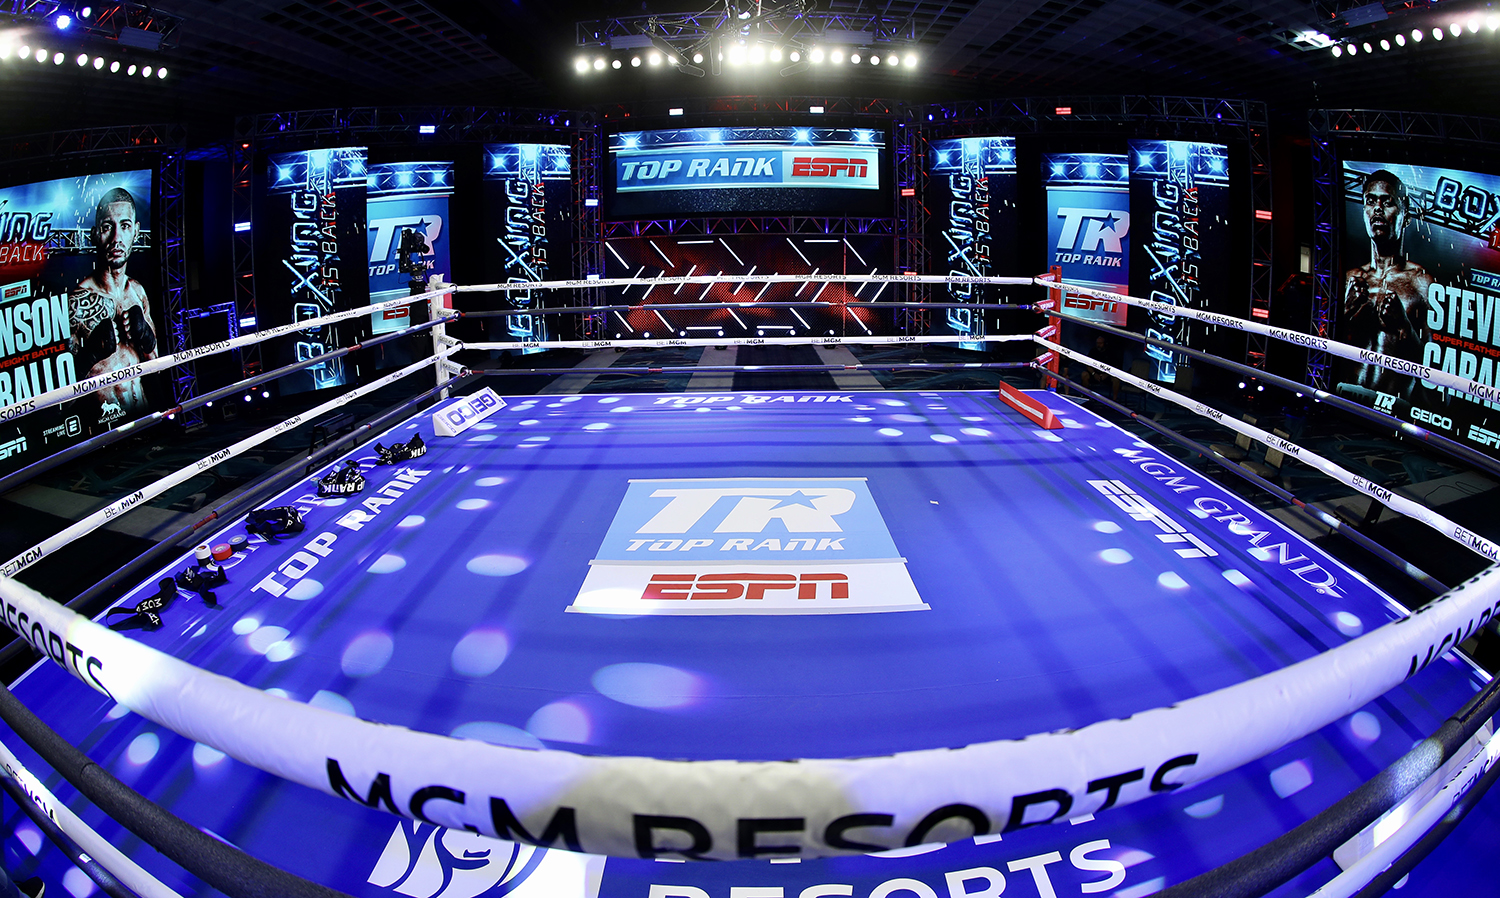 Topmøde program præmie ESPN Returns to Live-Events Ring With Top Rank Boxing Productions in Vegas